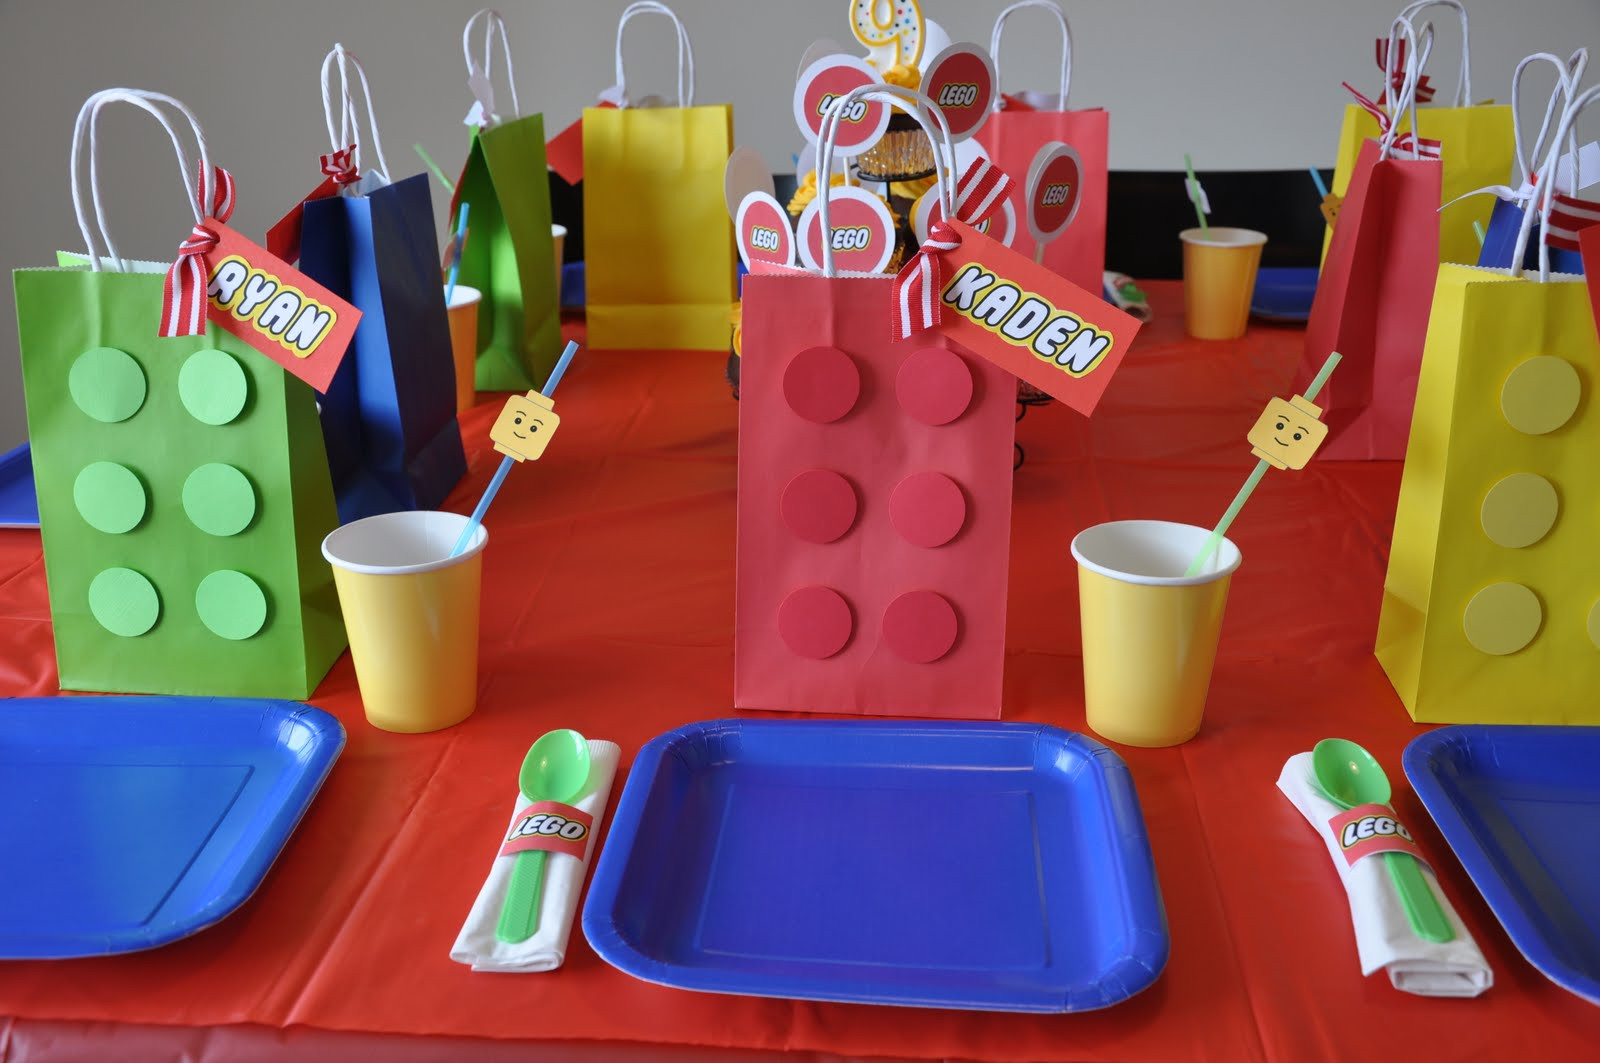 Lego Birthday Party Supplies
 Homemaking Fun A Lego Themed Birthday Party